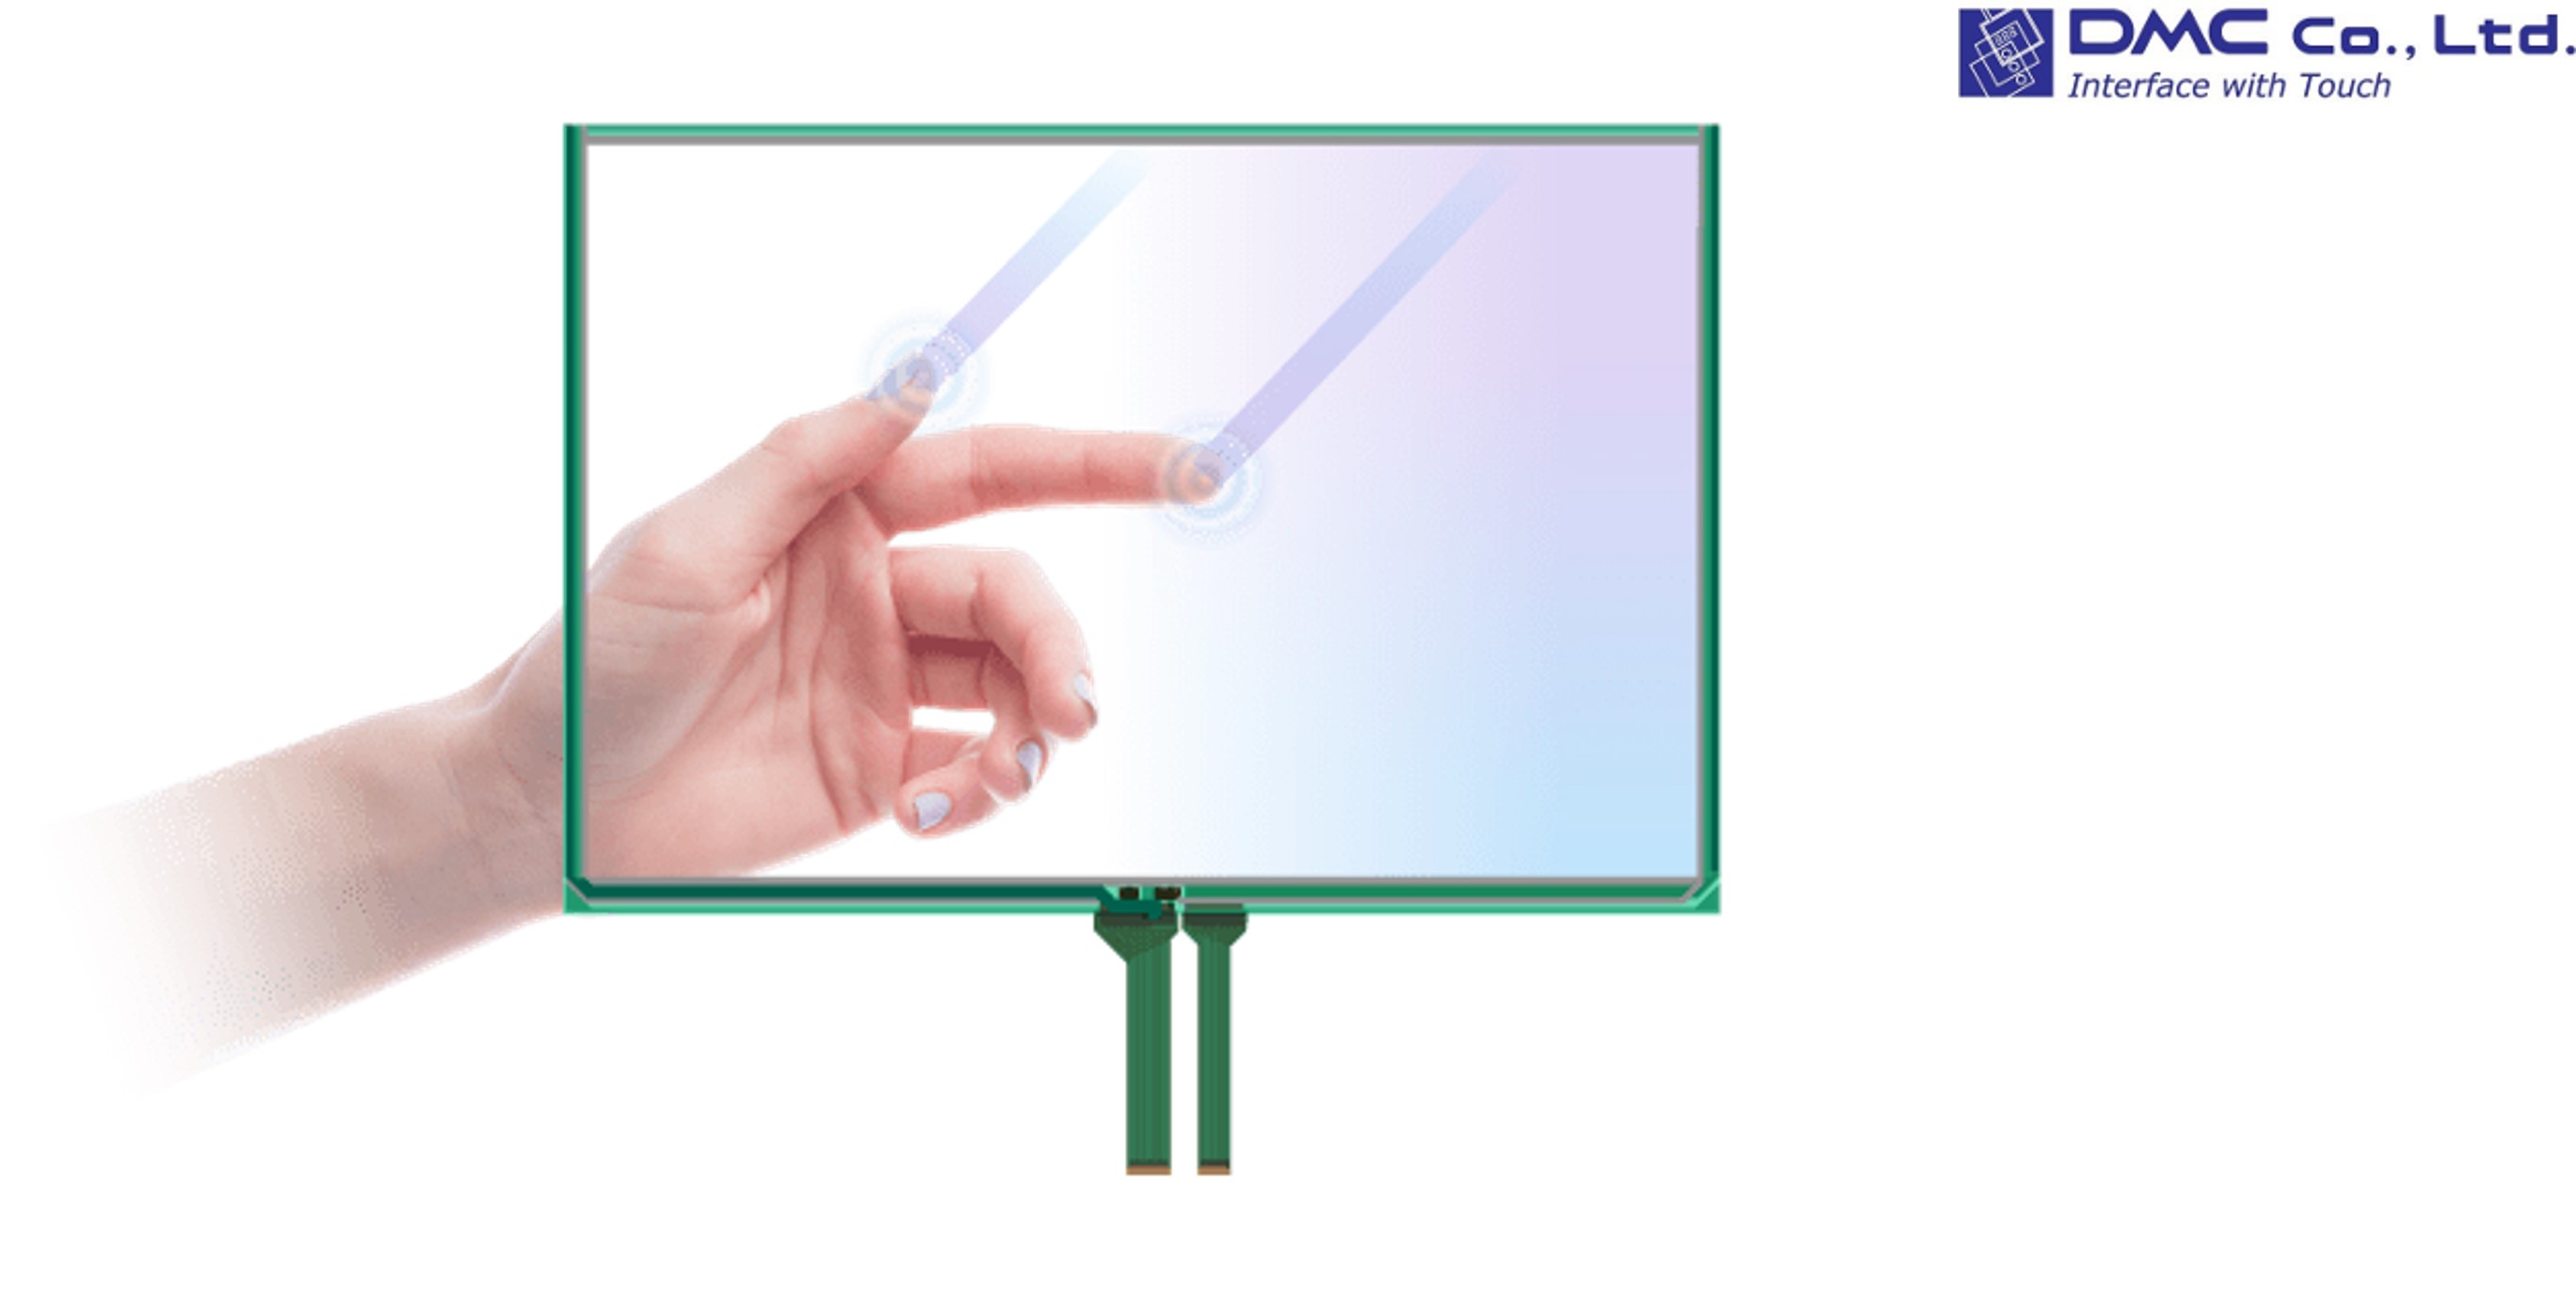 High-performance Multi-touch Resistive Touchscreen by DMC